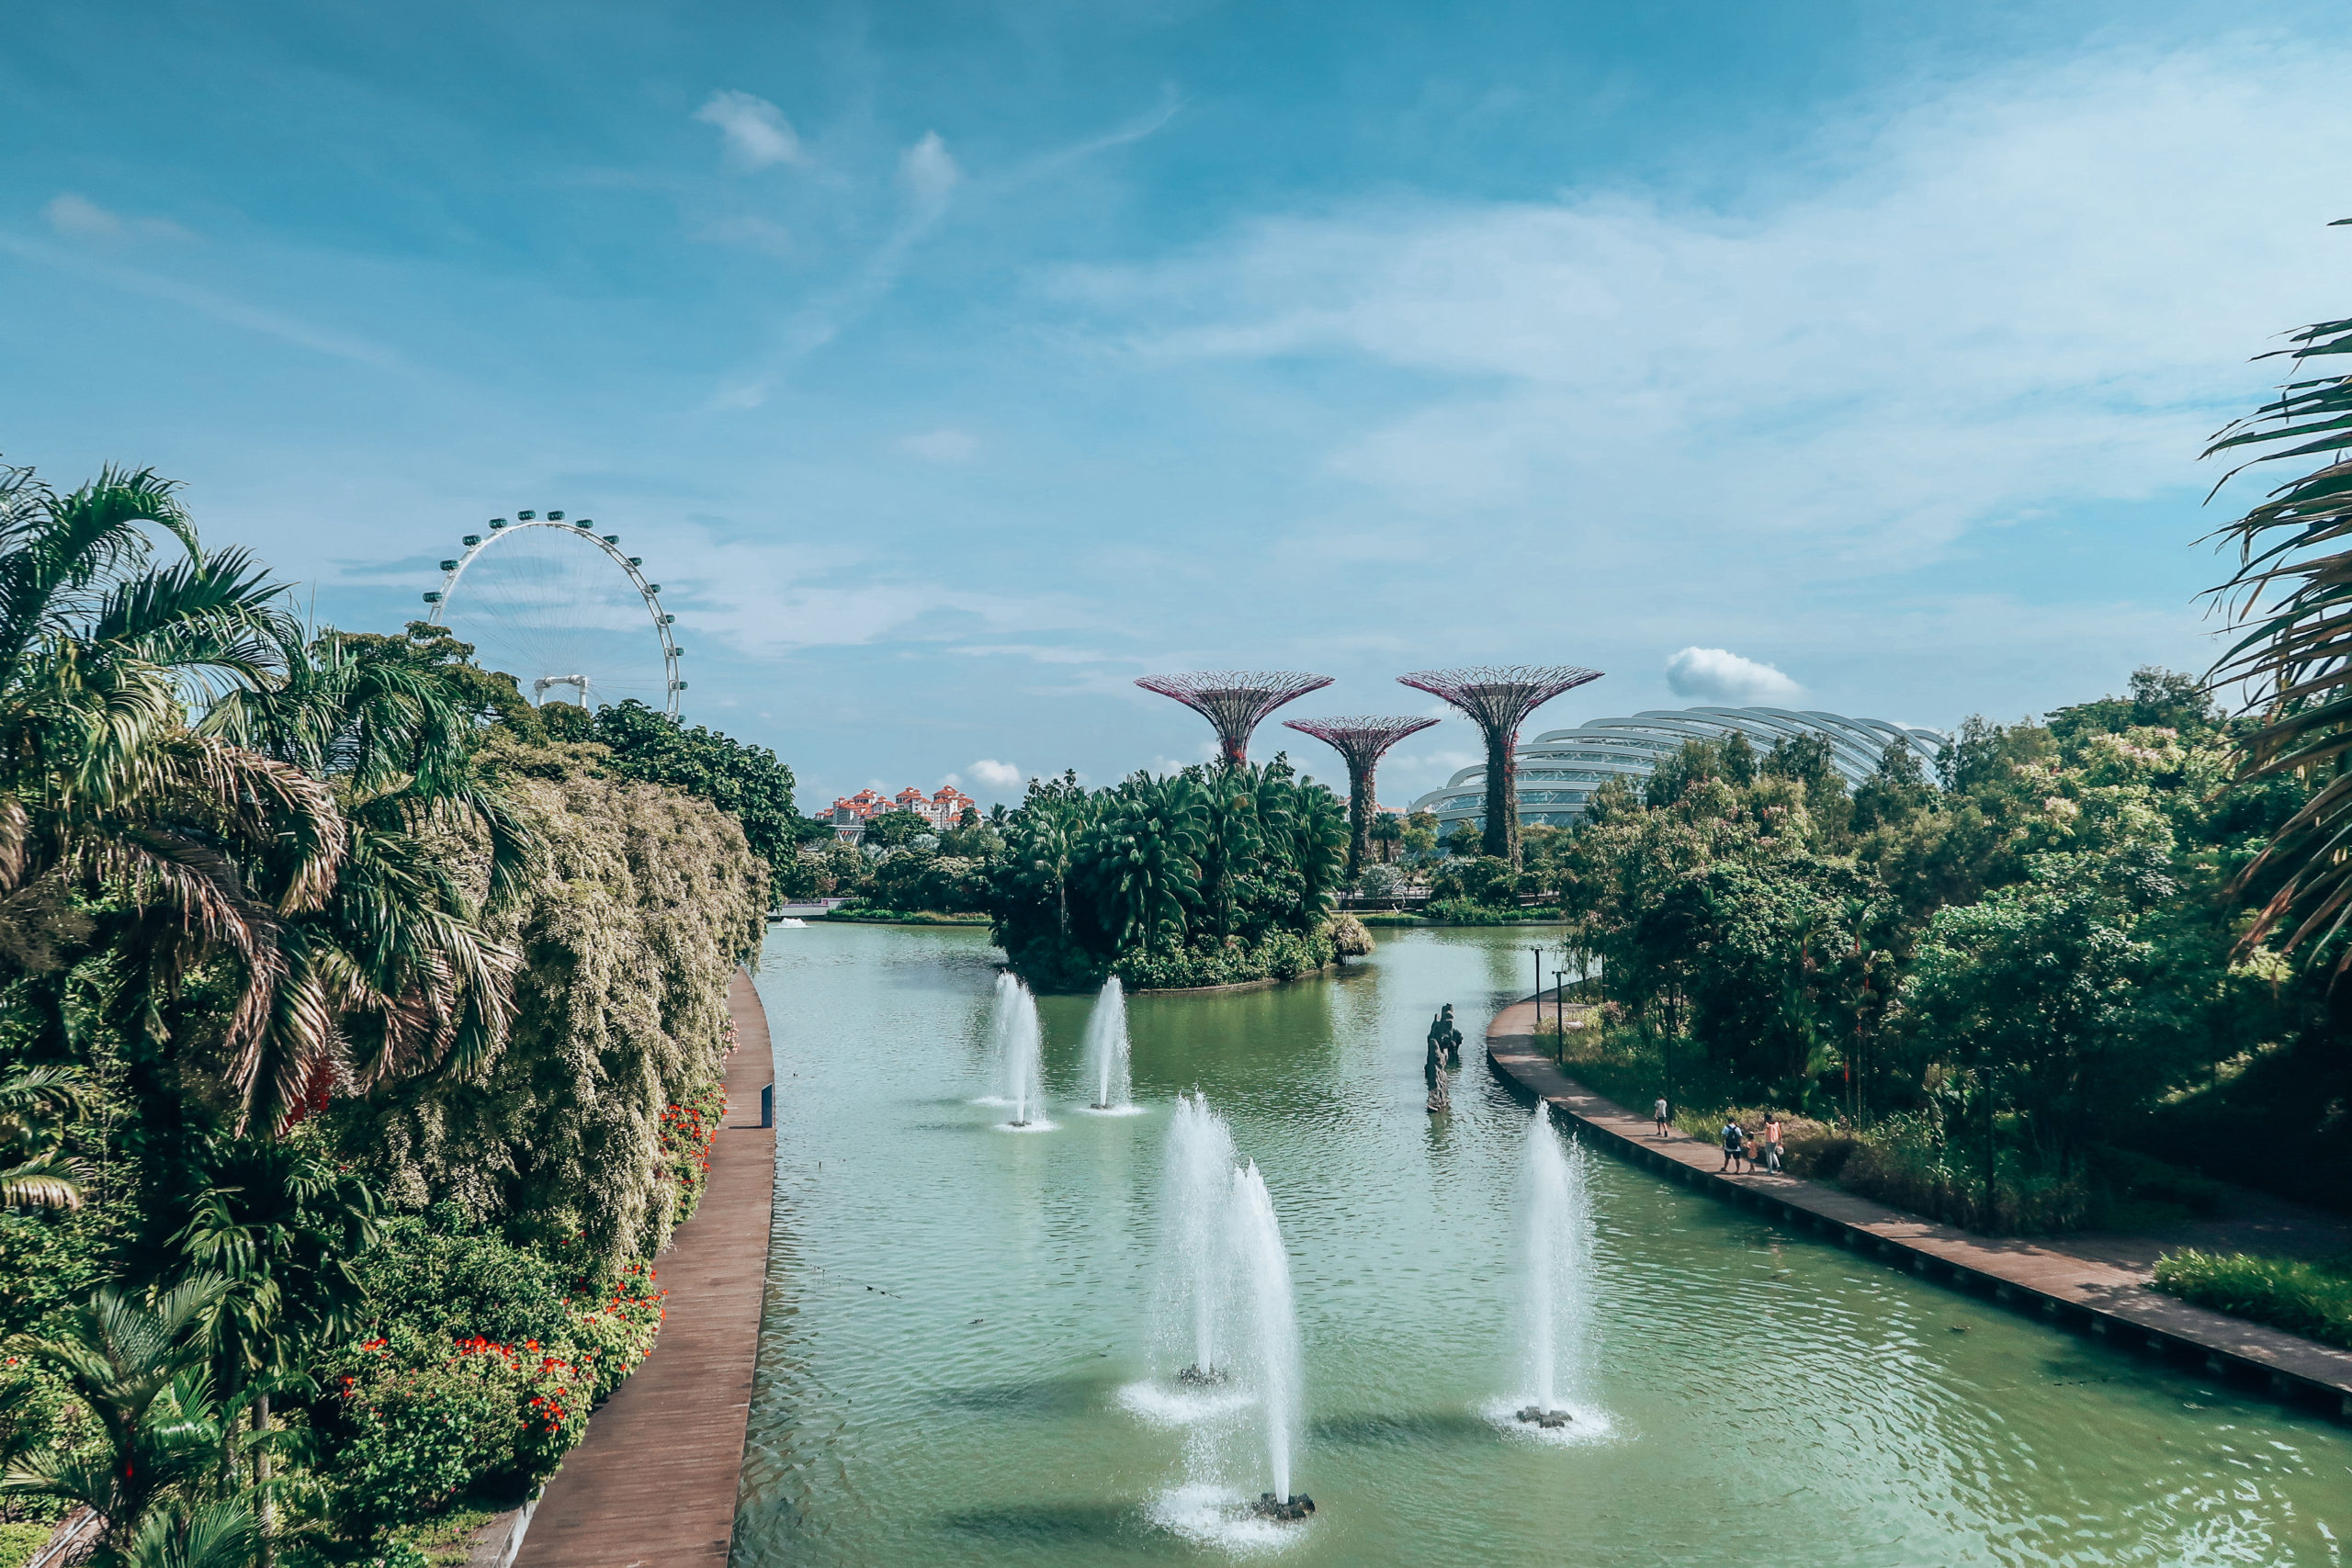 Visiting the Gardens by the Bay - taken from Dragonfly Bridge